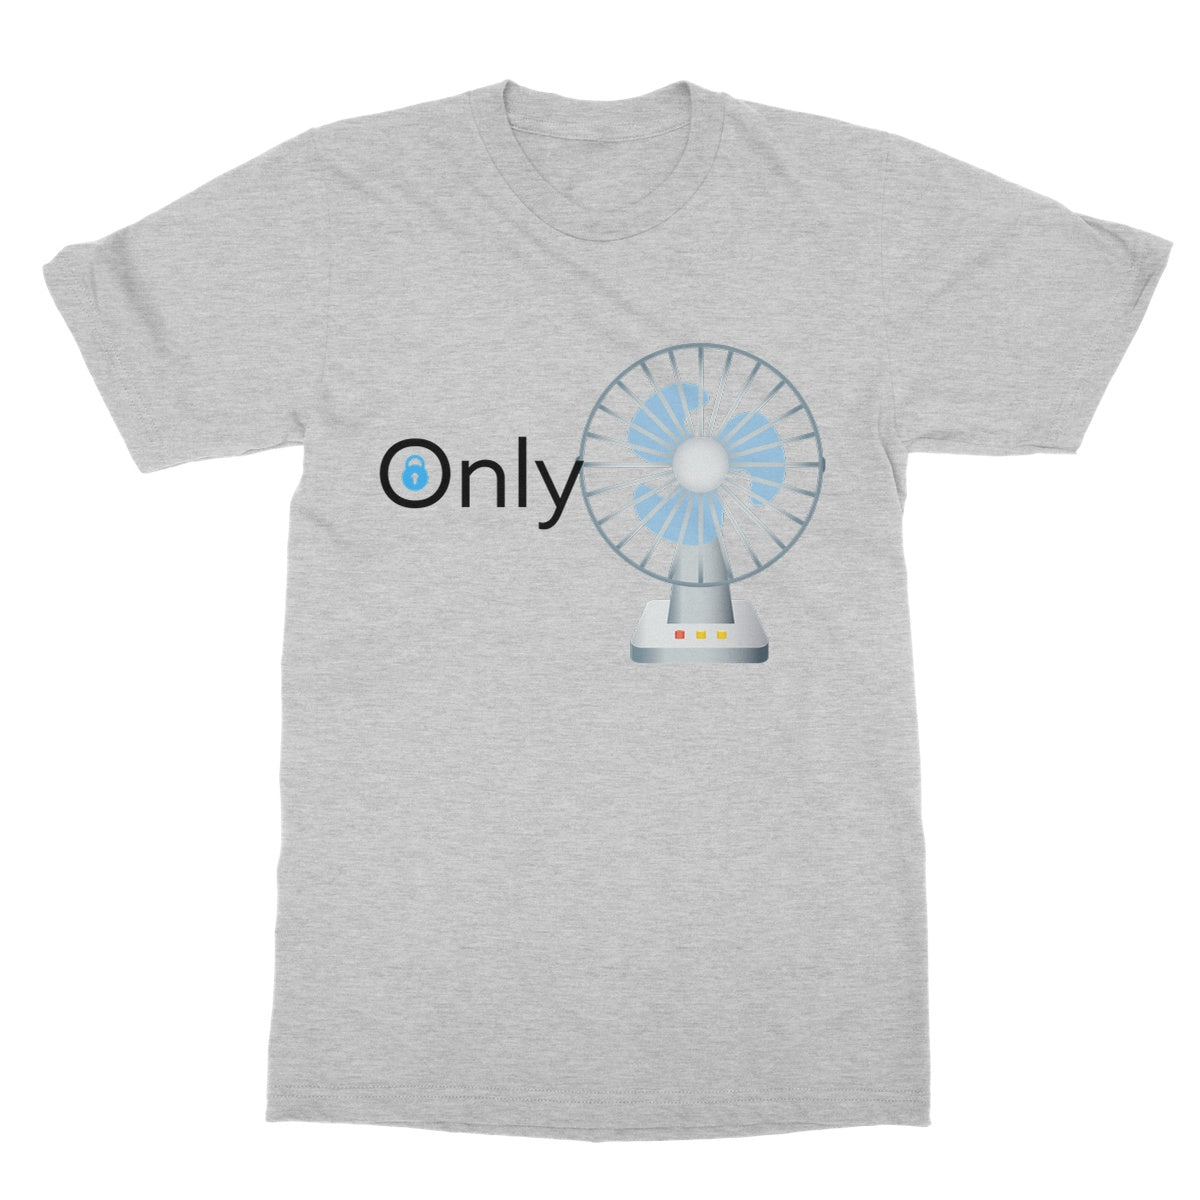 only fans t shirt grey